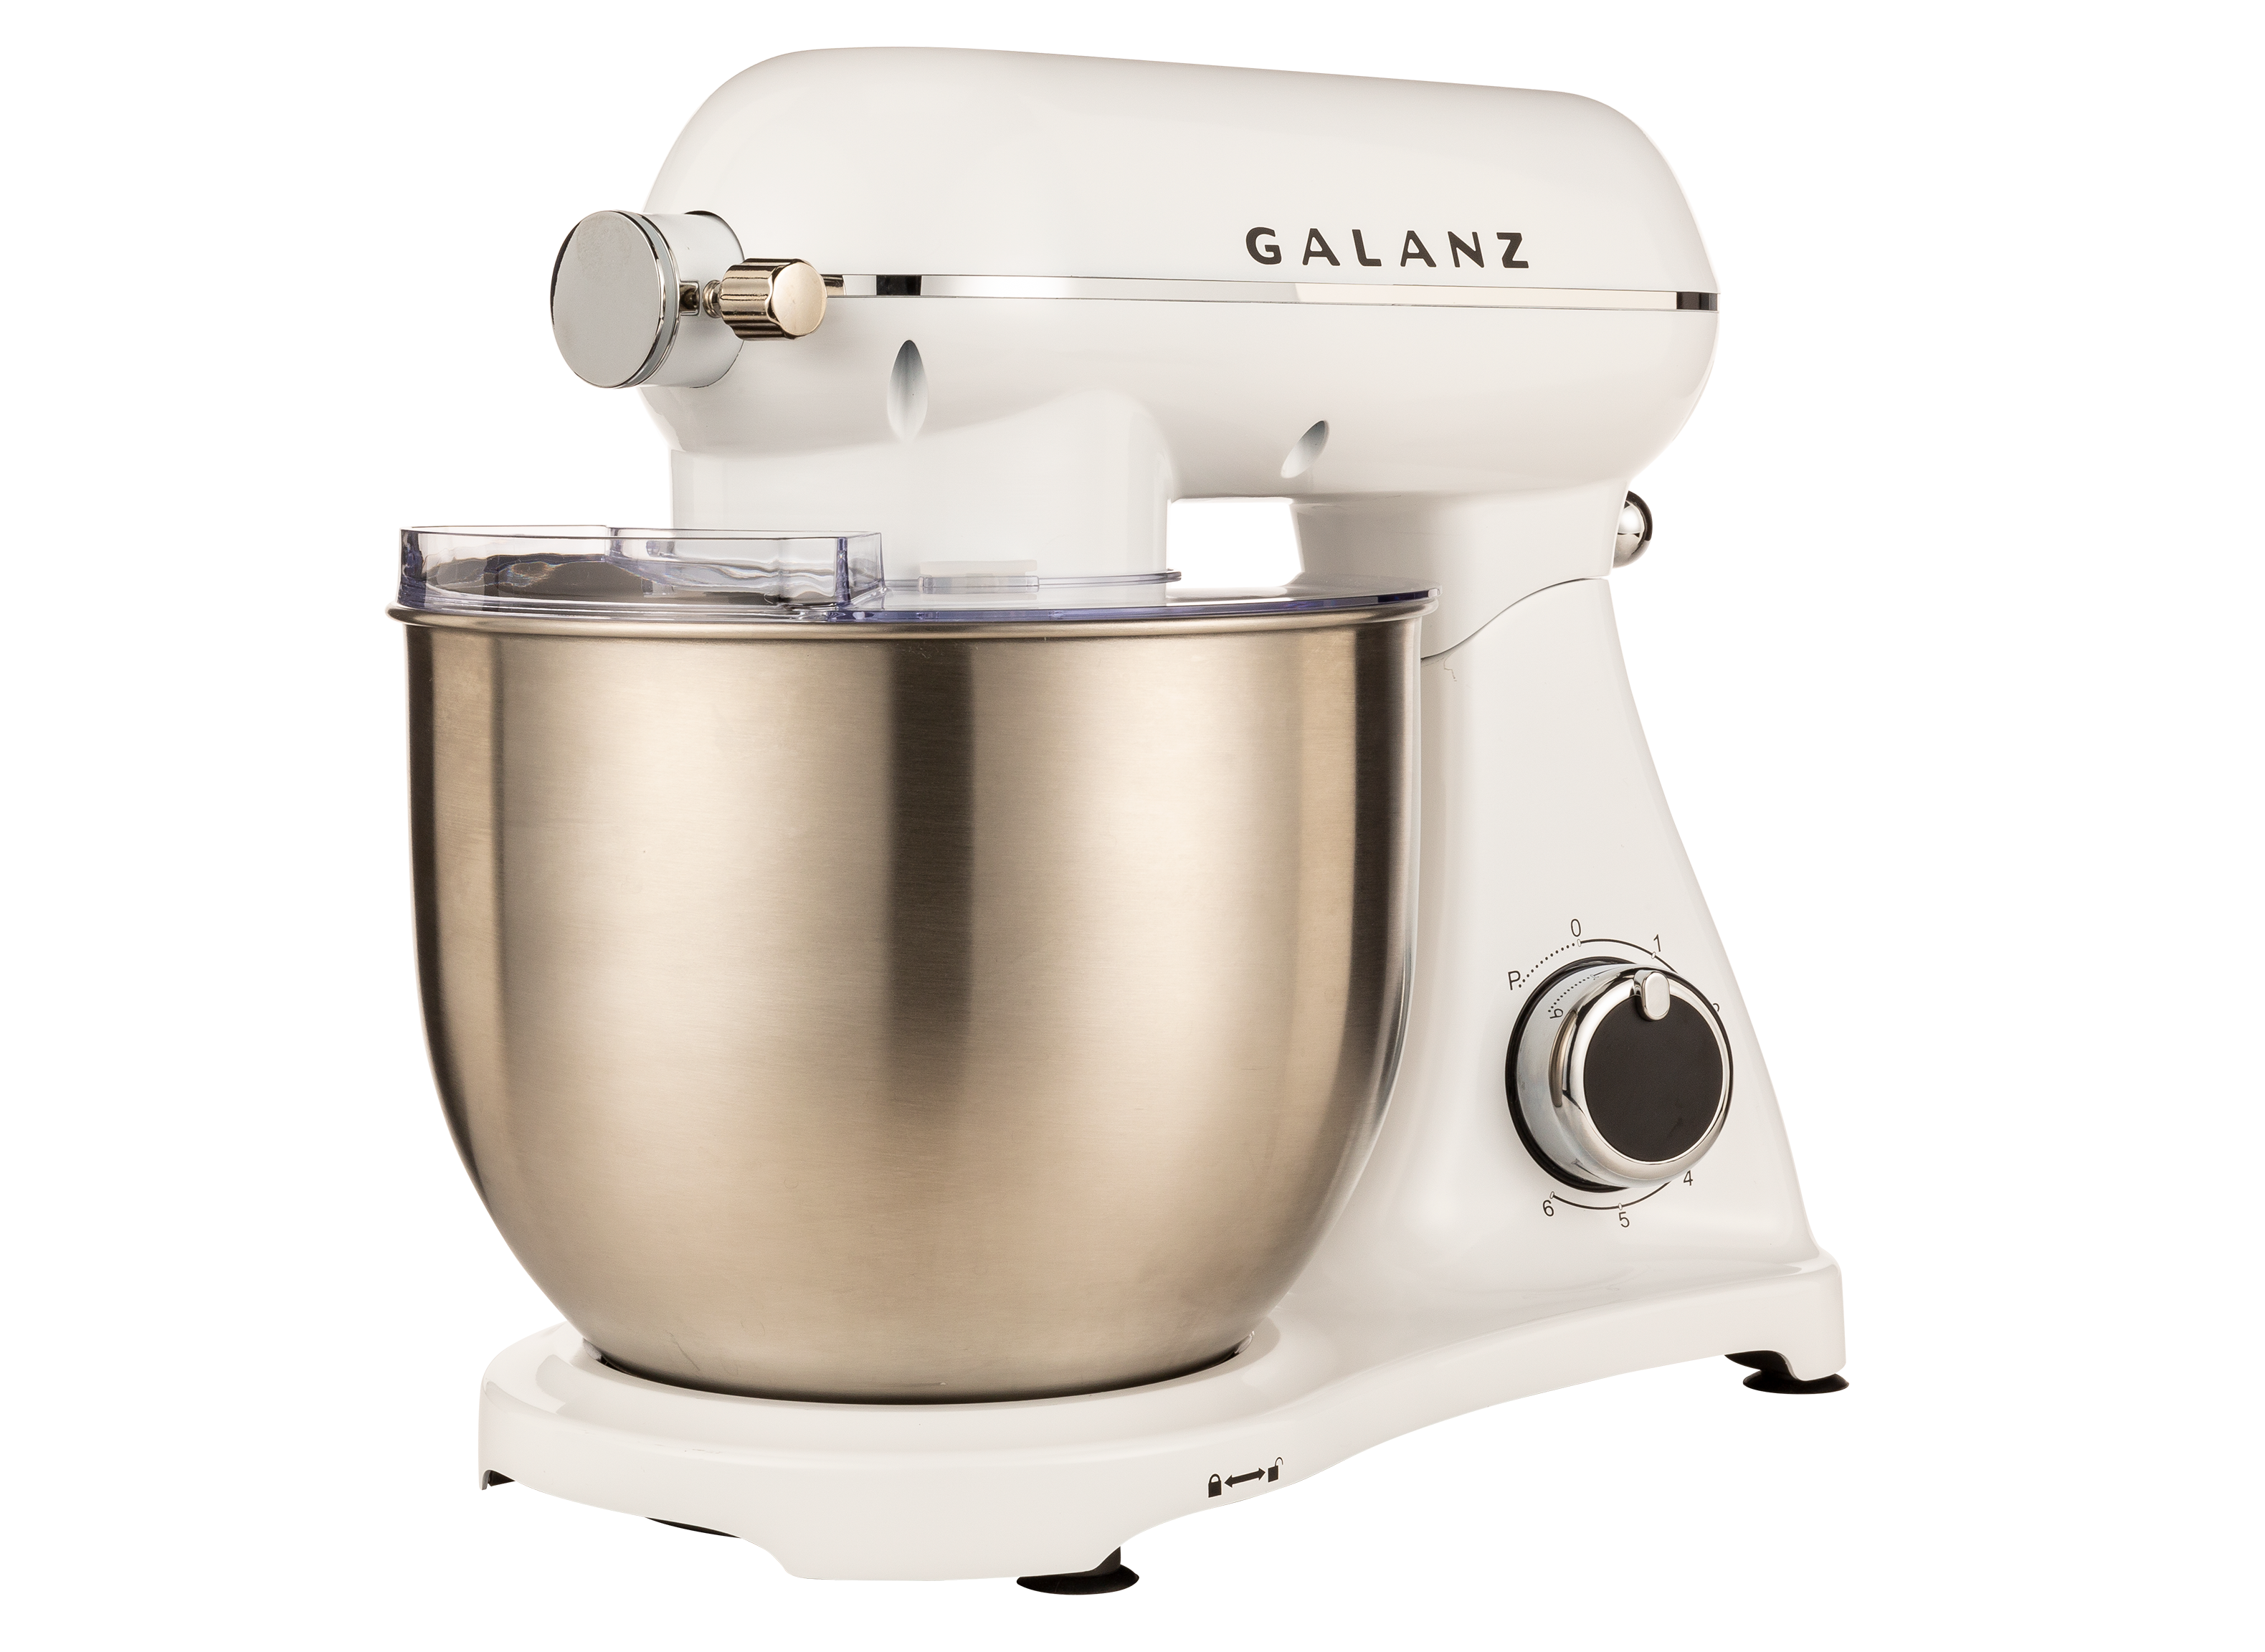 https://crdms.images.consumerreports.org/prod/products/cr/models/406975-stand-mixers-galanz-glsm07wer08-10031886.png